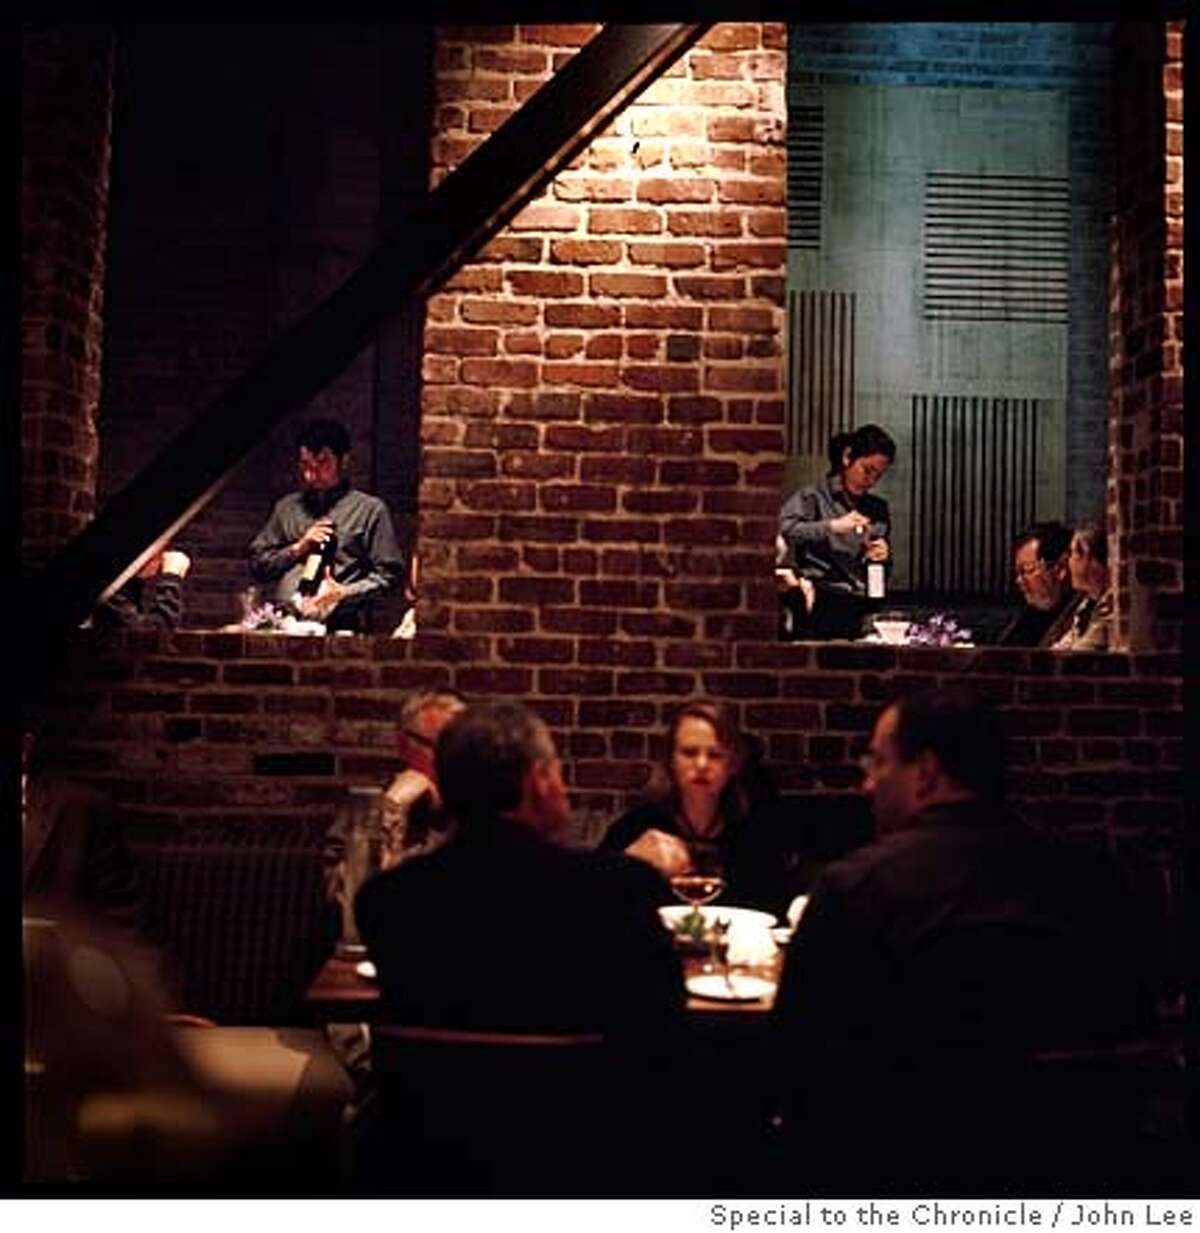 PHOTO FOR THE CHRONICLE MAGAZINE BY JOHN LEE - Servers introduce diners to their respective bottles of wine during a recent Wednesday dinner crowd at the Myth restaurant in San Francisco's Jackson Square district.Ran on: 04-02-2006 A recent Wednesday dinner crowd at Myth restaurant.